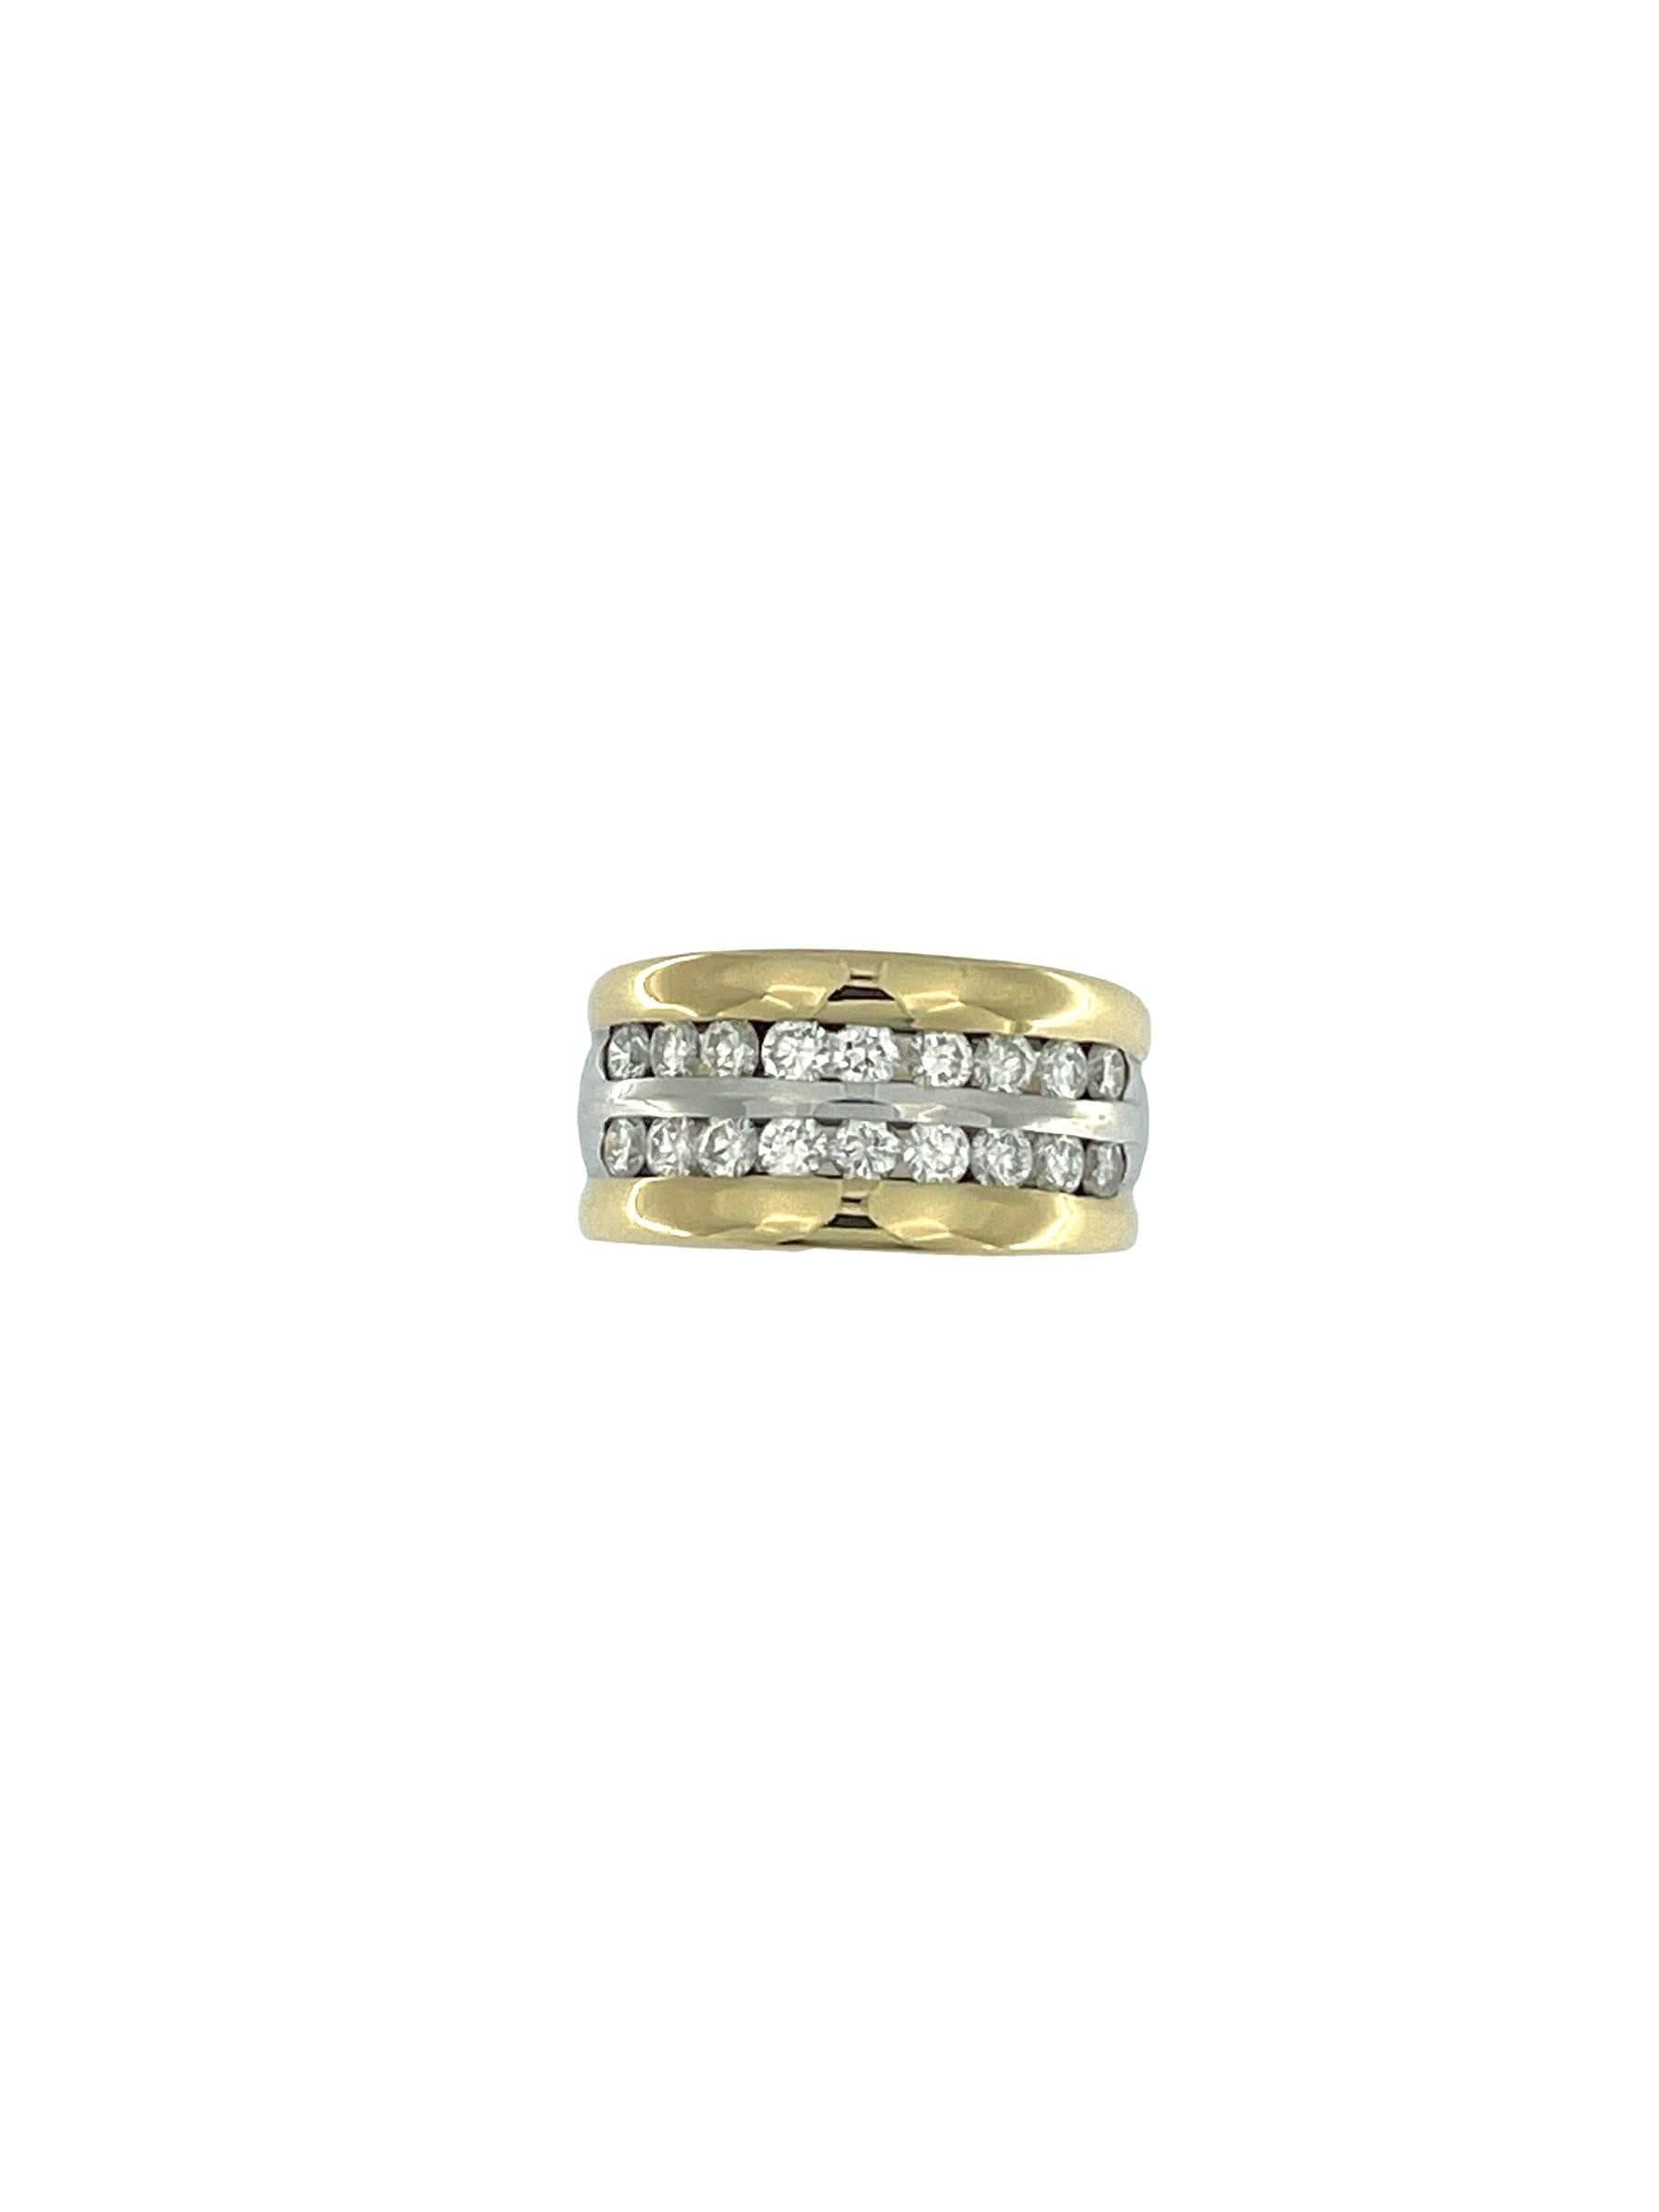 HRD Certified Diamonds Yellow and White Gold Band Ring In Good Condition For Sale In Esch-Sur-Alzette, LU